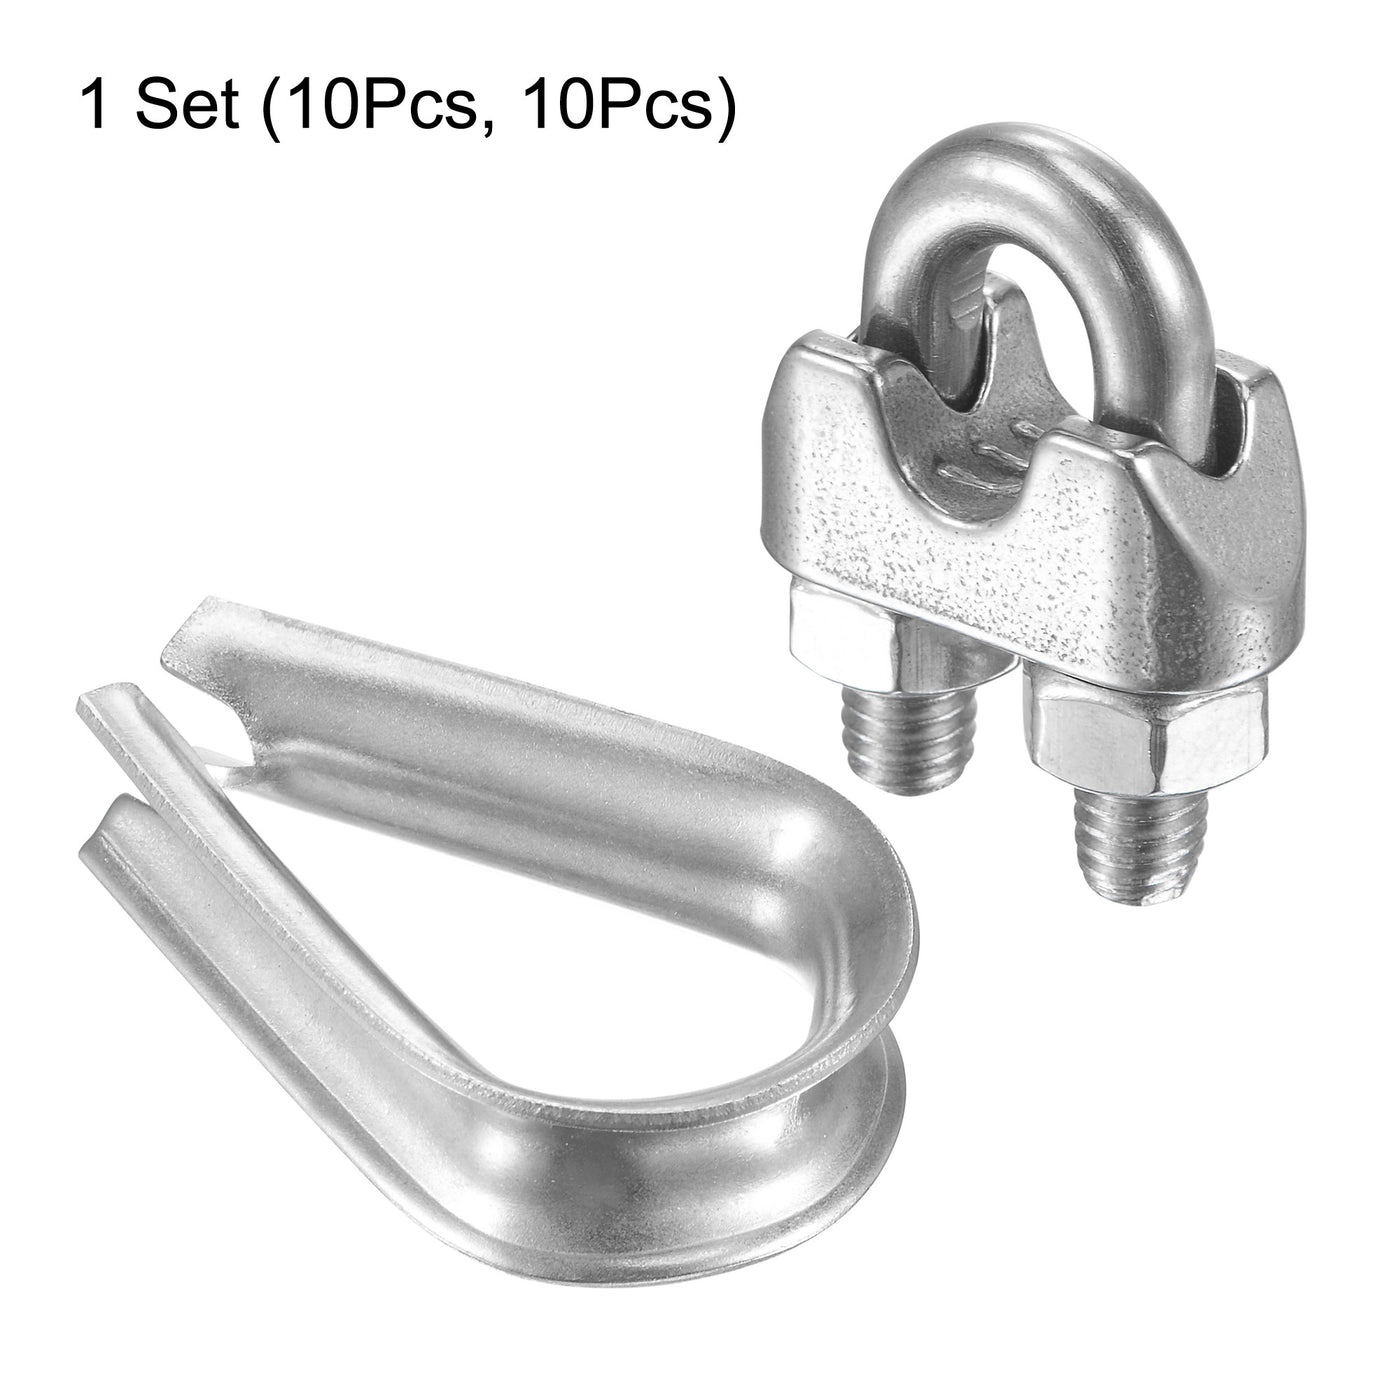 uxcell Uxcell Wire Rope Cable Clip Kit for M6, Included Rope Clamp 10Pcs and Thimble Rigging 10Pcs, 304 Stainless Steel U Bolt Saddle Fastener